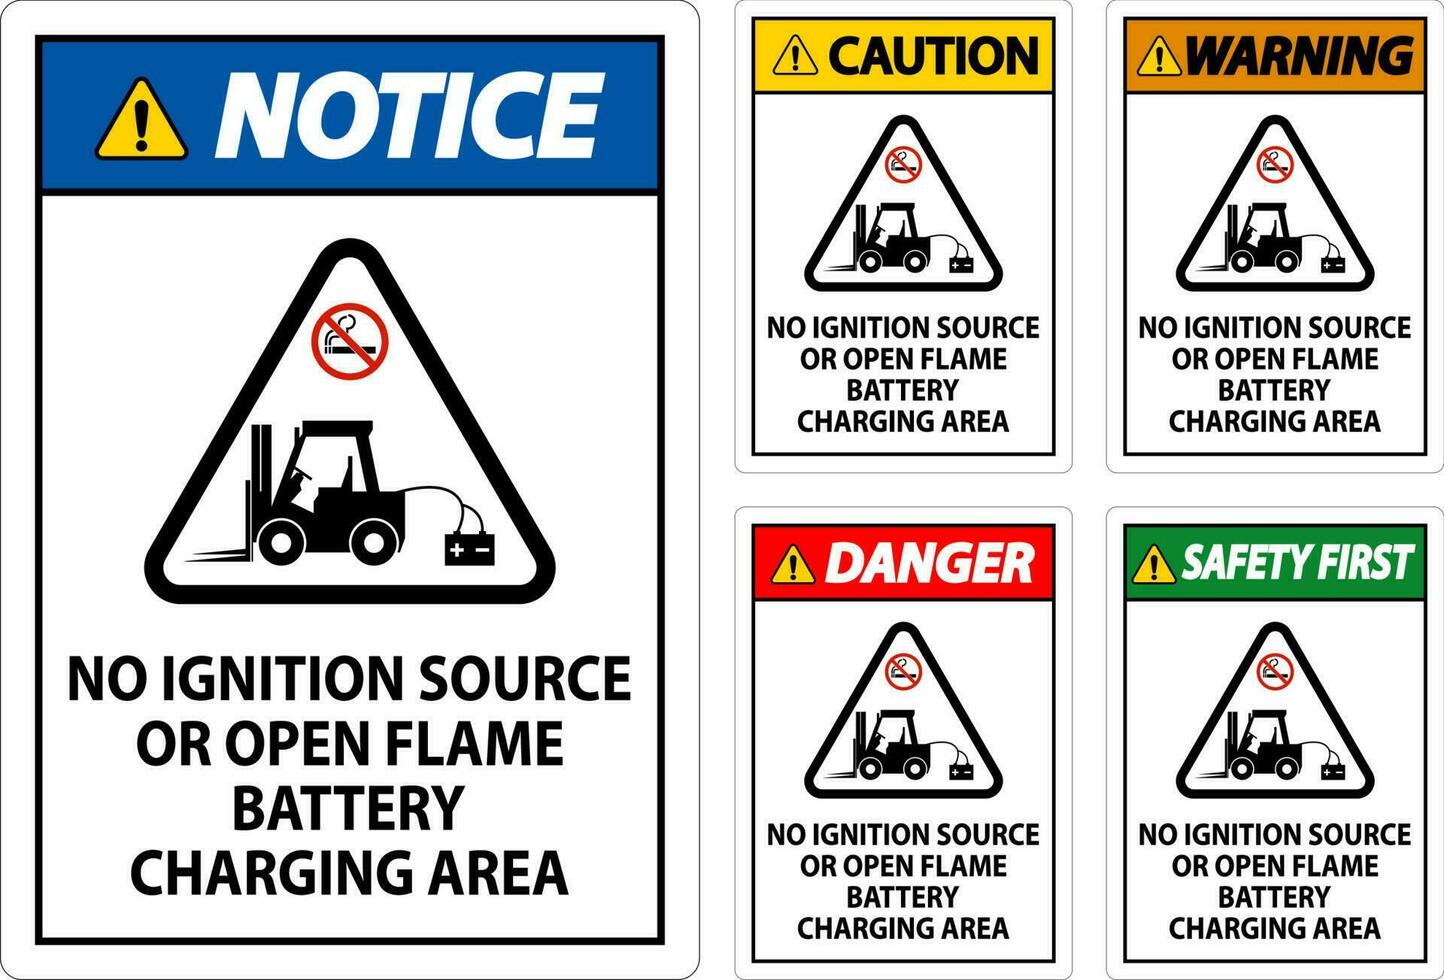 Warning Sign No Ignition Source Or Open Flame, Battery Charging Area vector